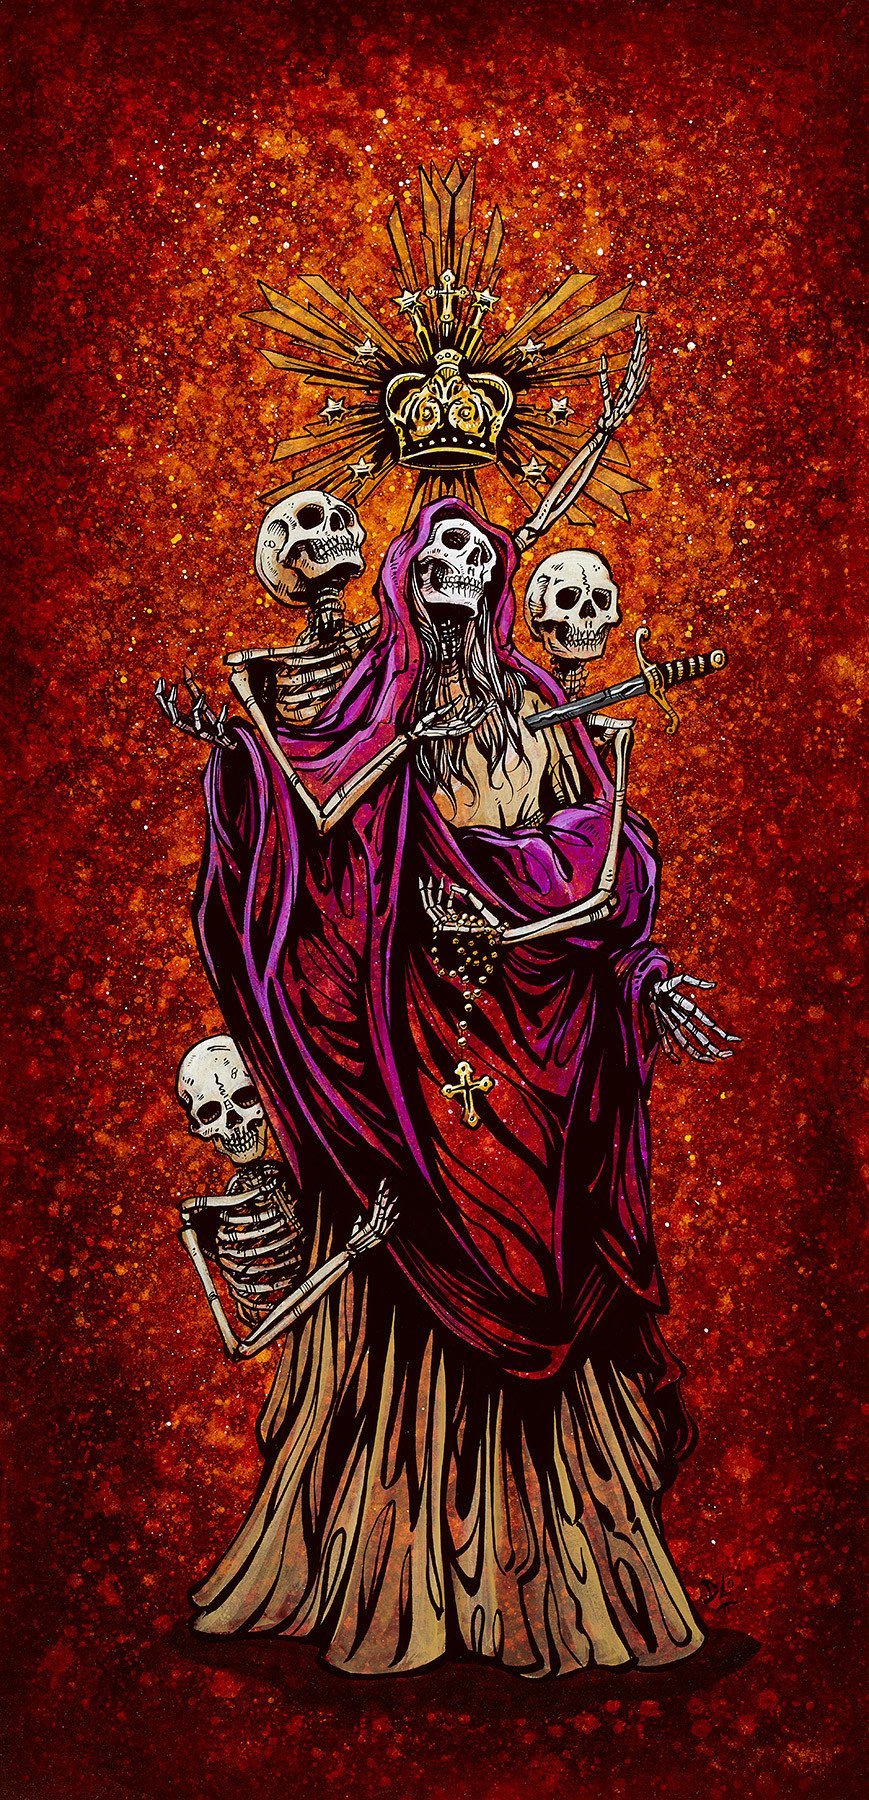 Veneration of Mary by Day of the Dead Artist David Lozeau, Day of the Dead Art, Dia de los Muertos Art, Dia de los Muertos Artist